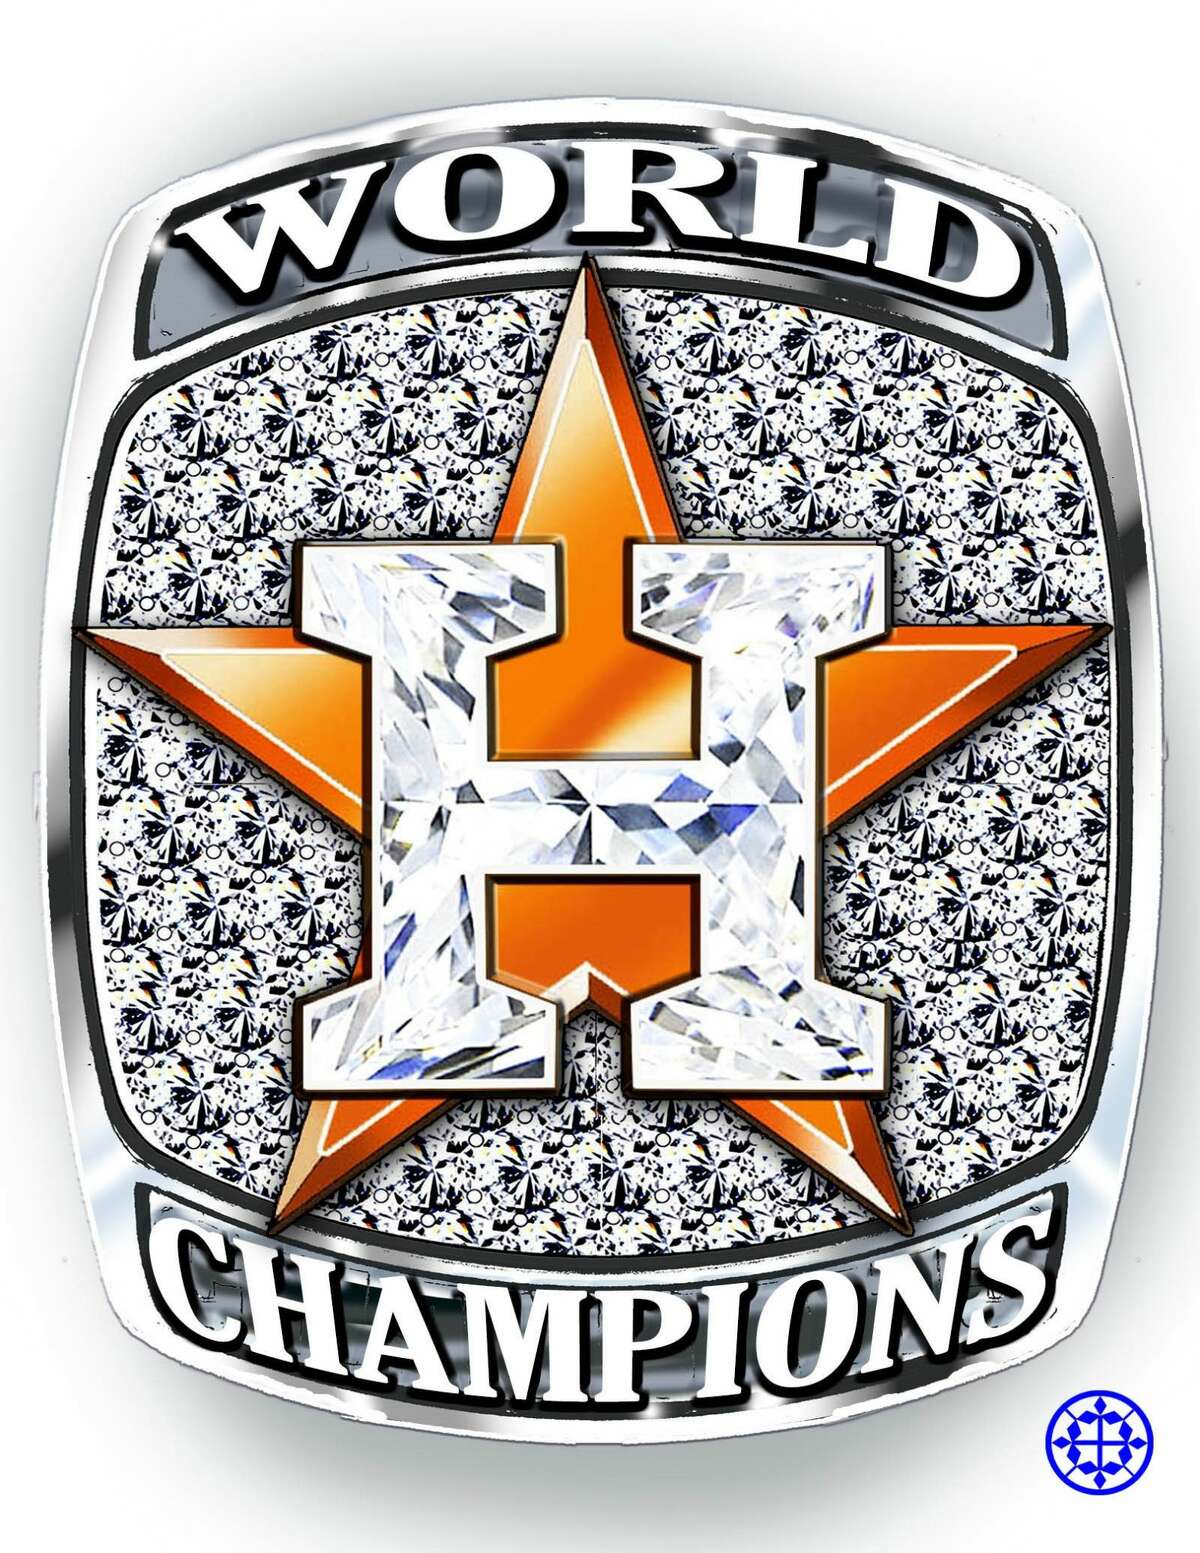 How World Series championship rings should look, according to Houston